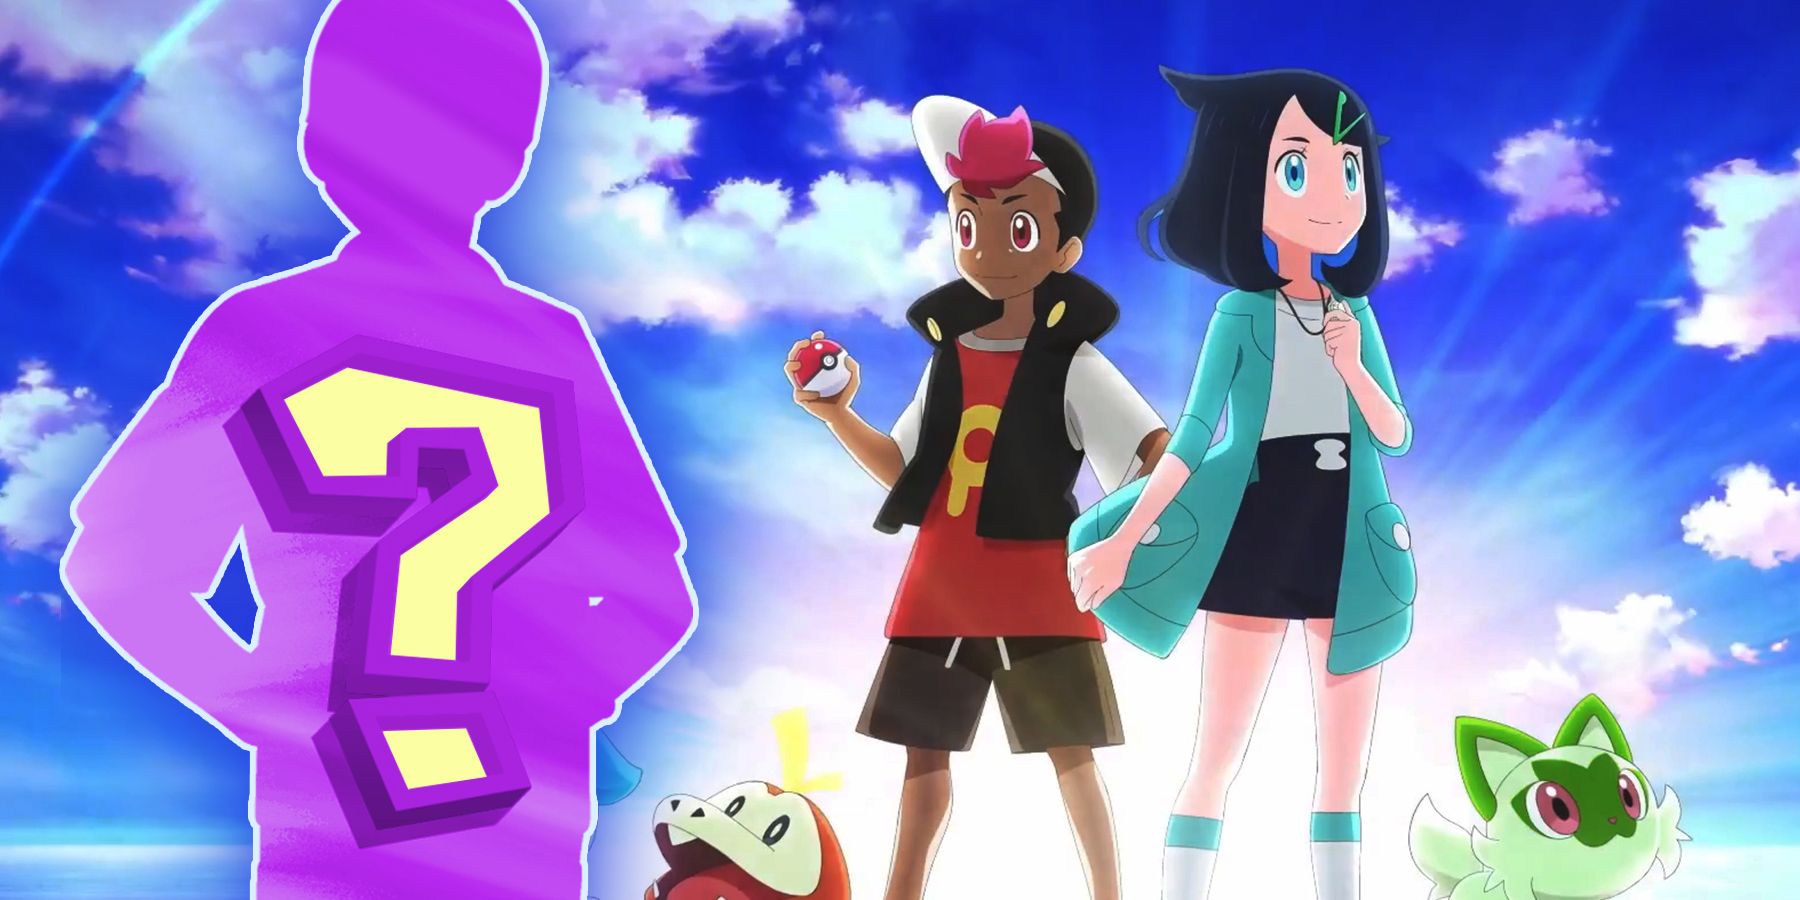 Pokémon Horizons: Why Is There No Info on the Third Protagonist?